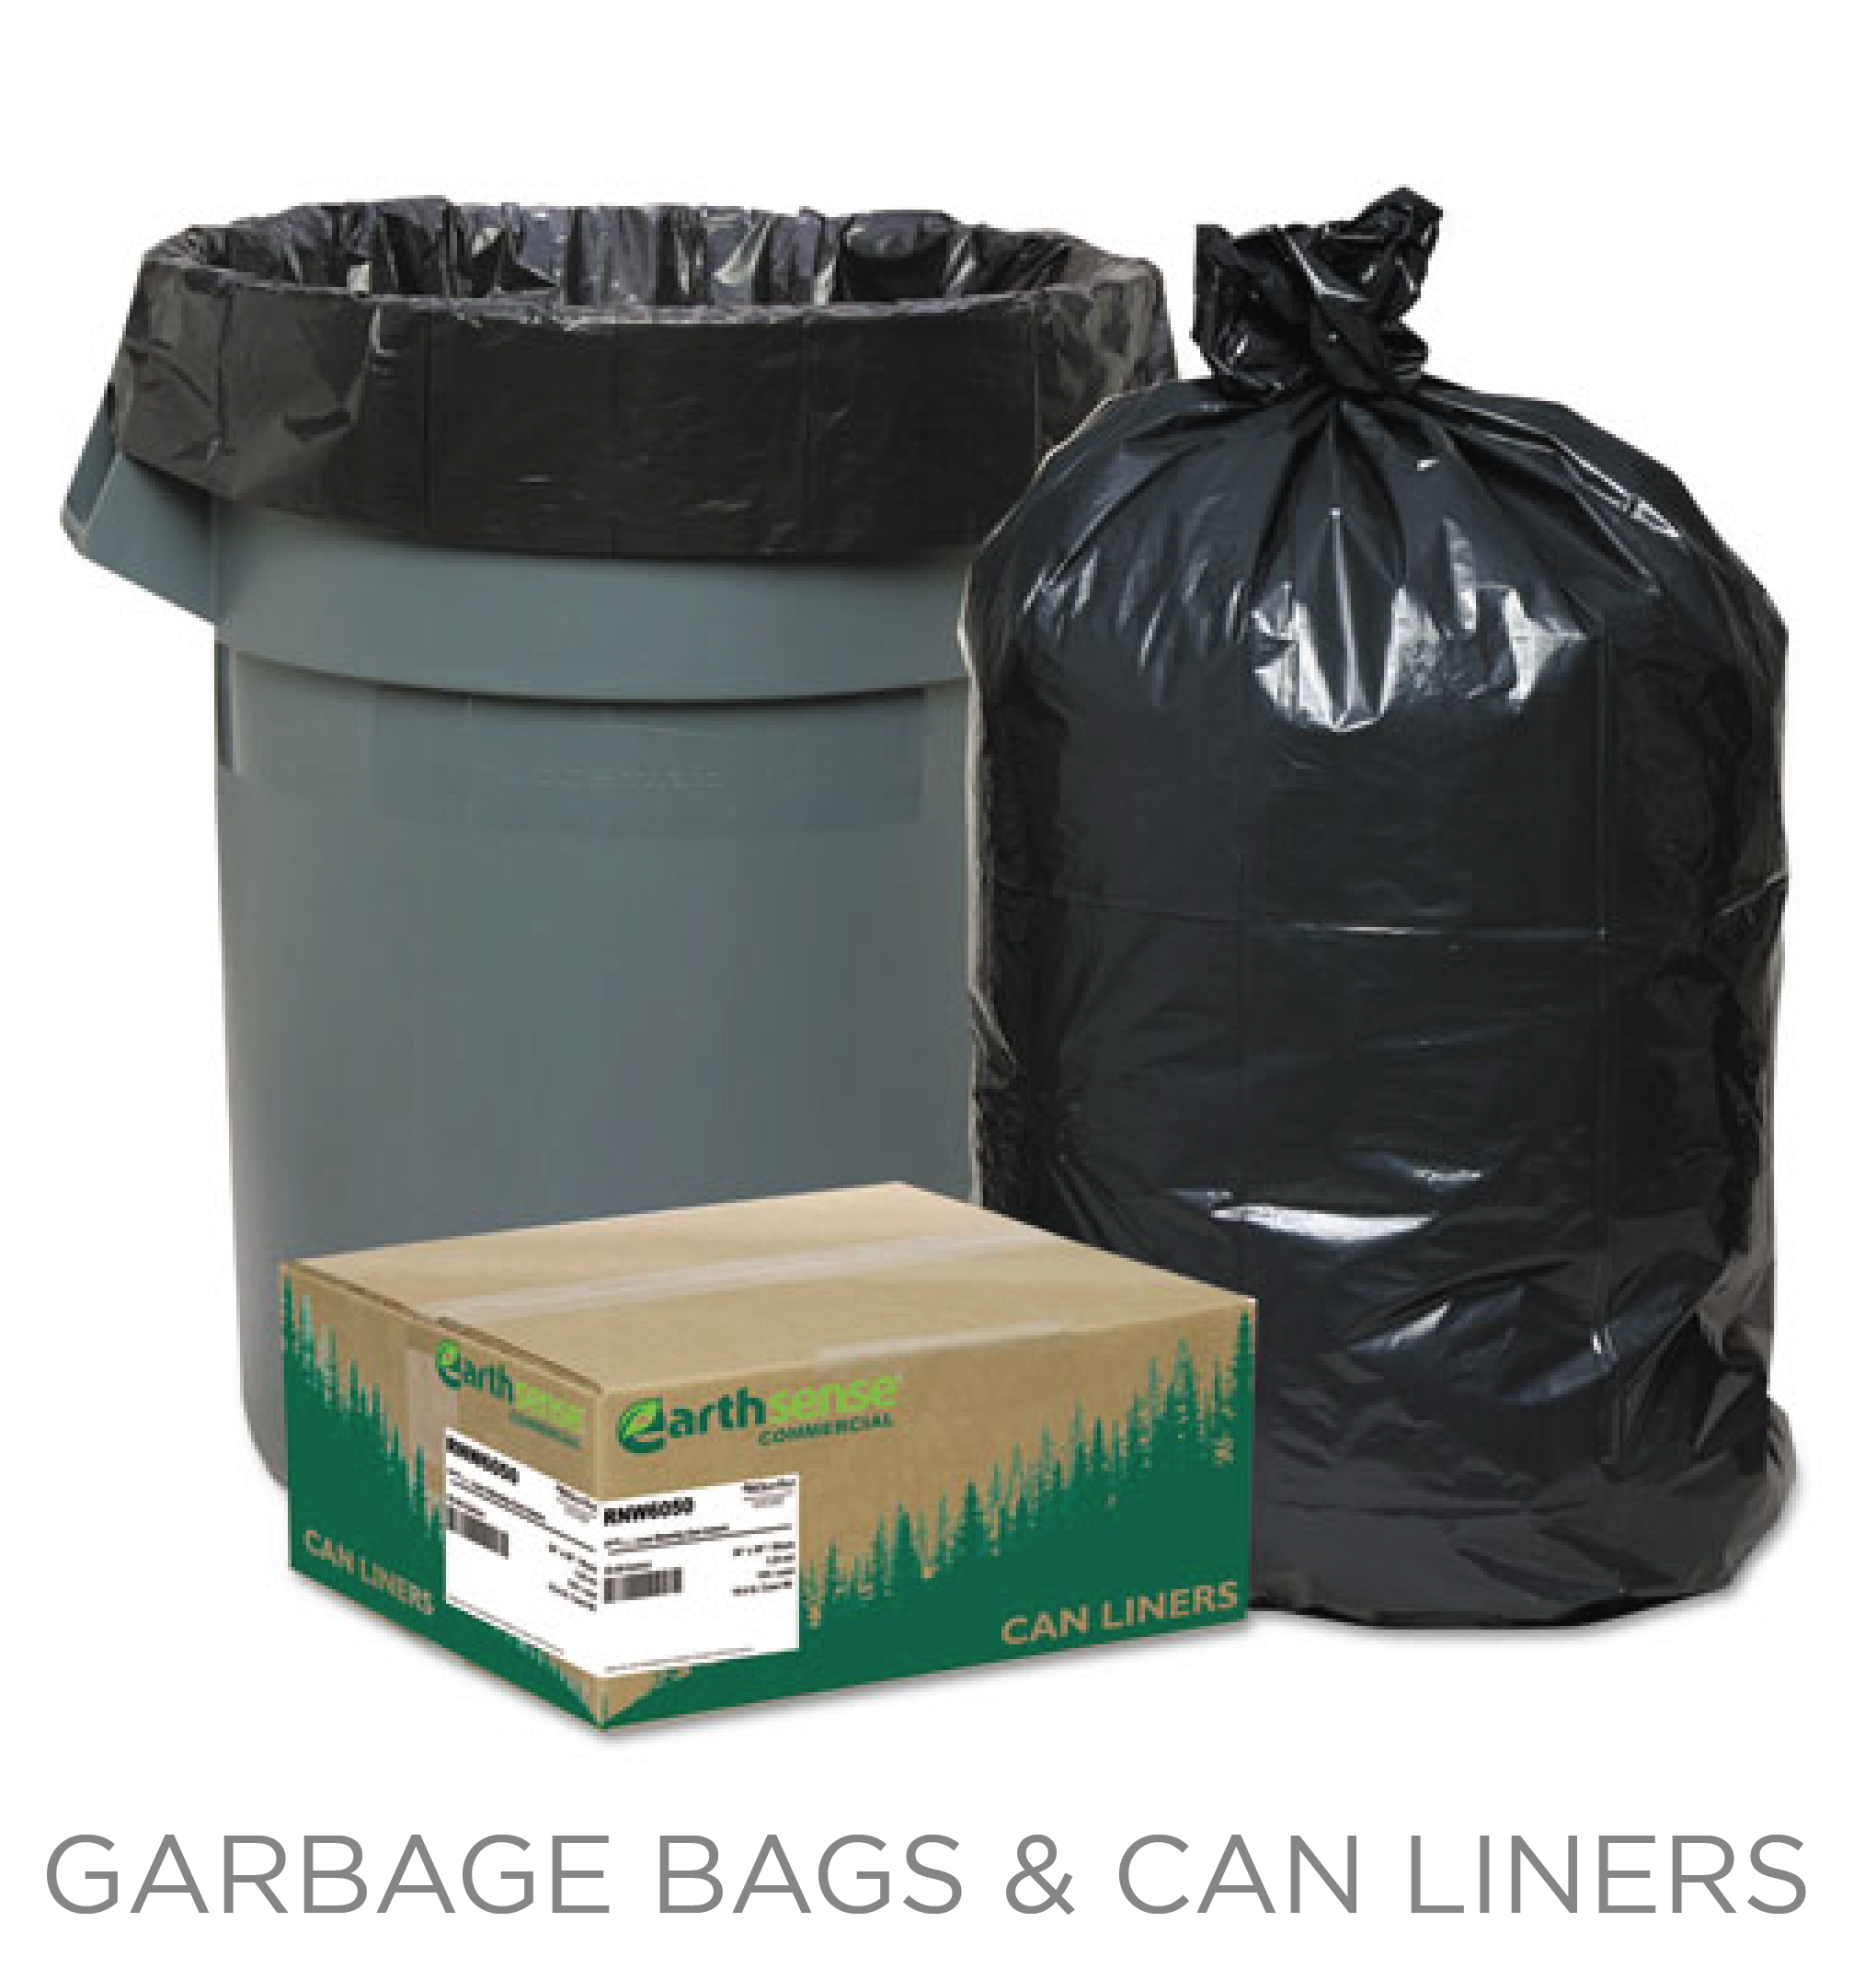 Garbage Bags - Preparing for the Holidays